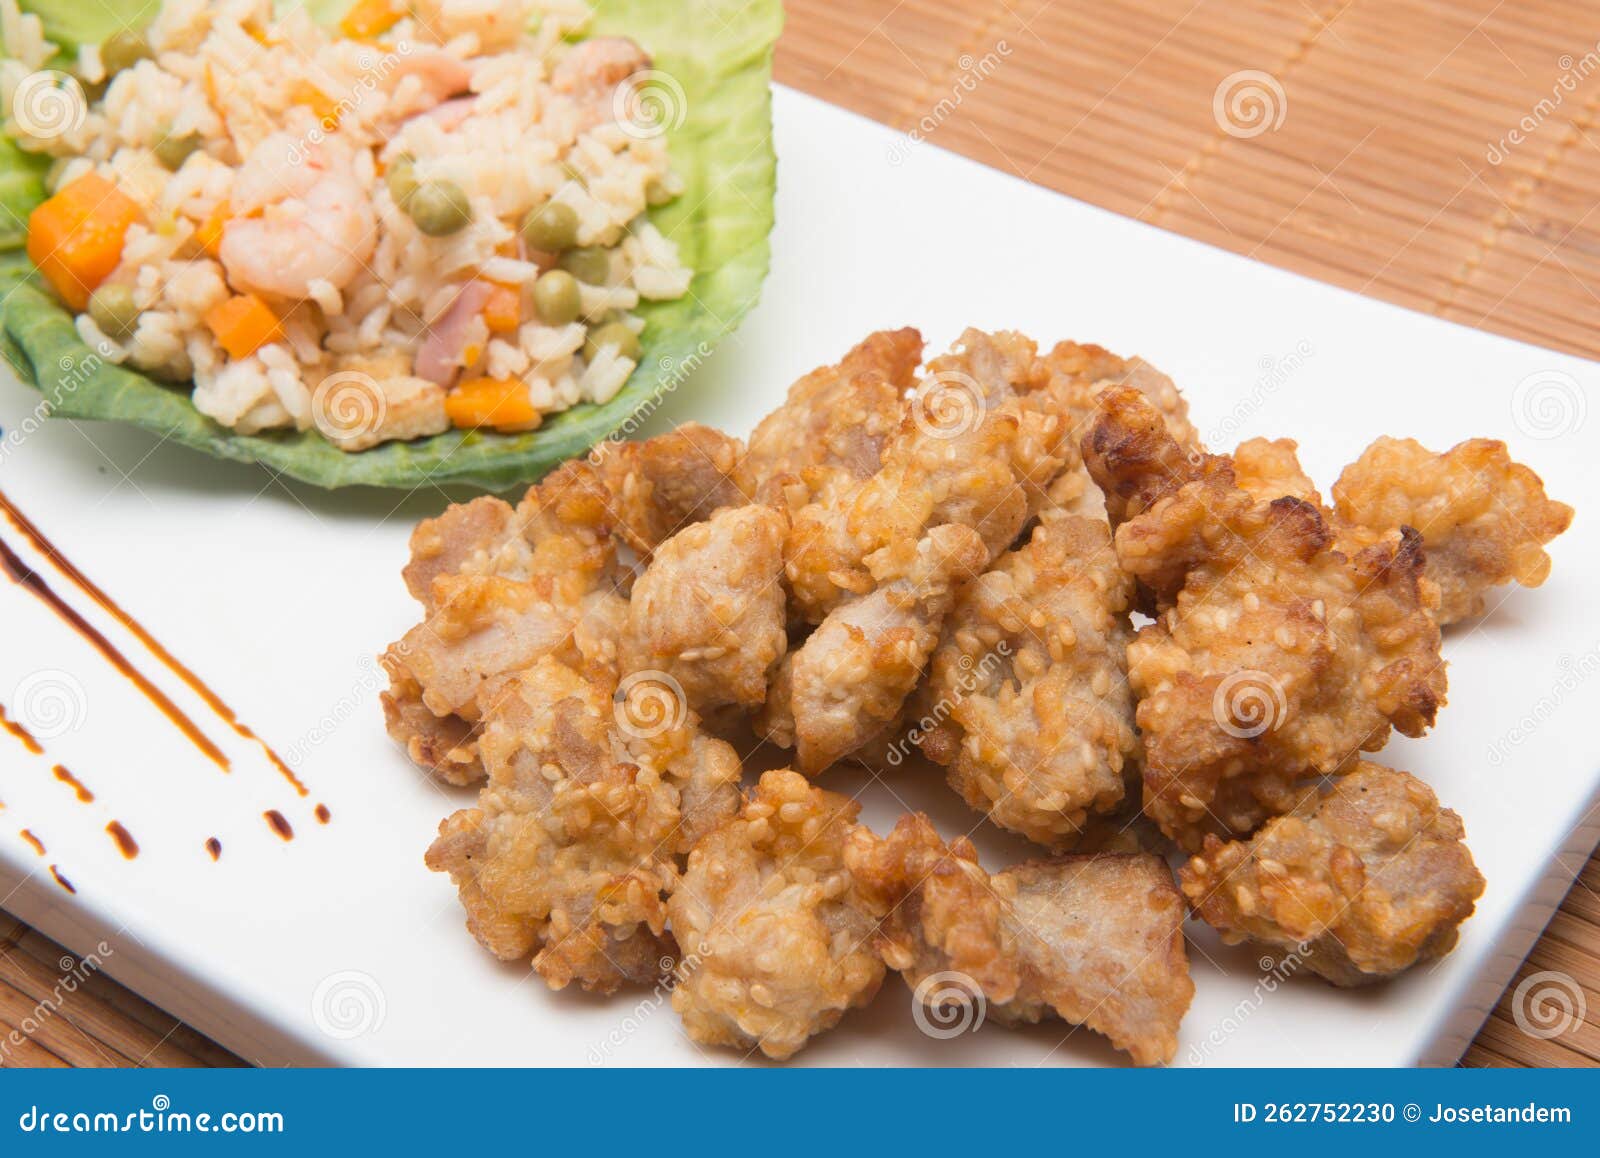 sesame chicken dish and chopsticks on bamboo placemat